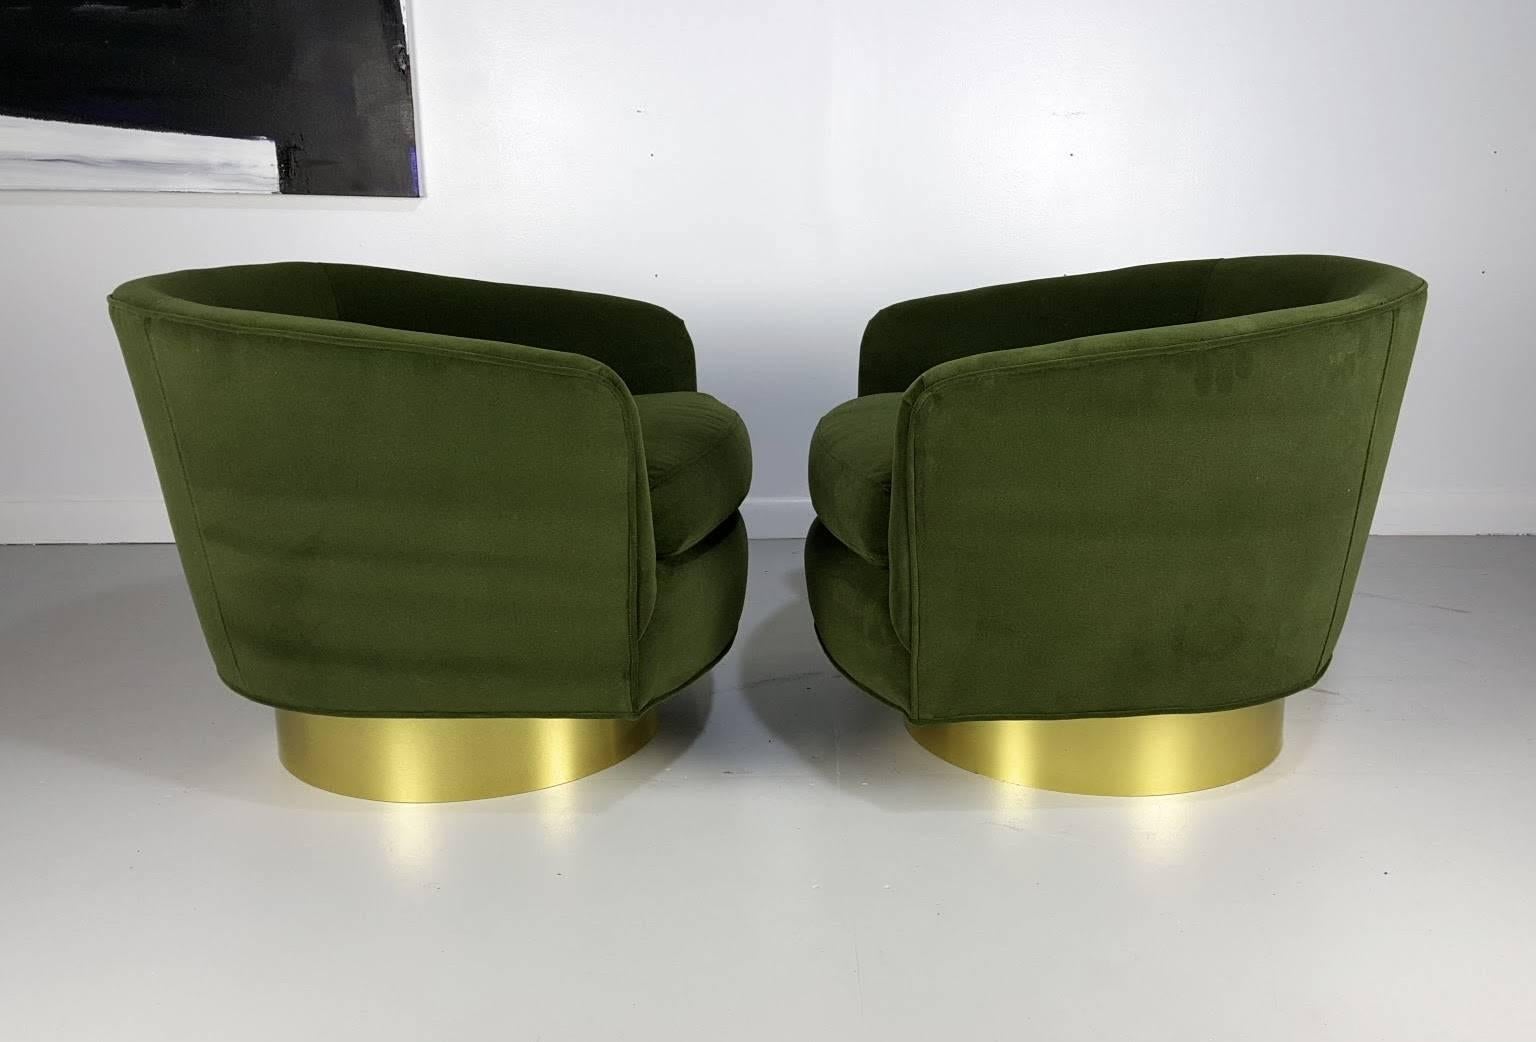 Contemporary Swivel Lounge Chairs in Velvet with Polished Brass Bases, style of Milo Baughman